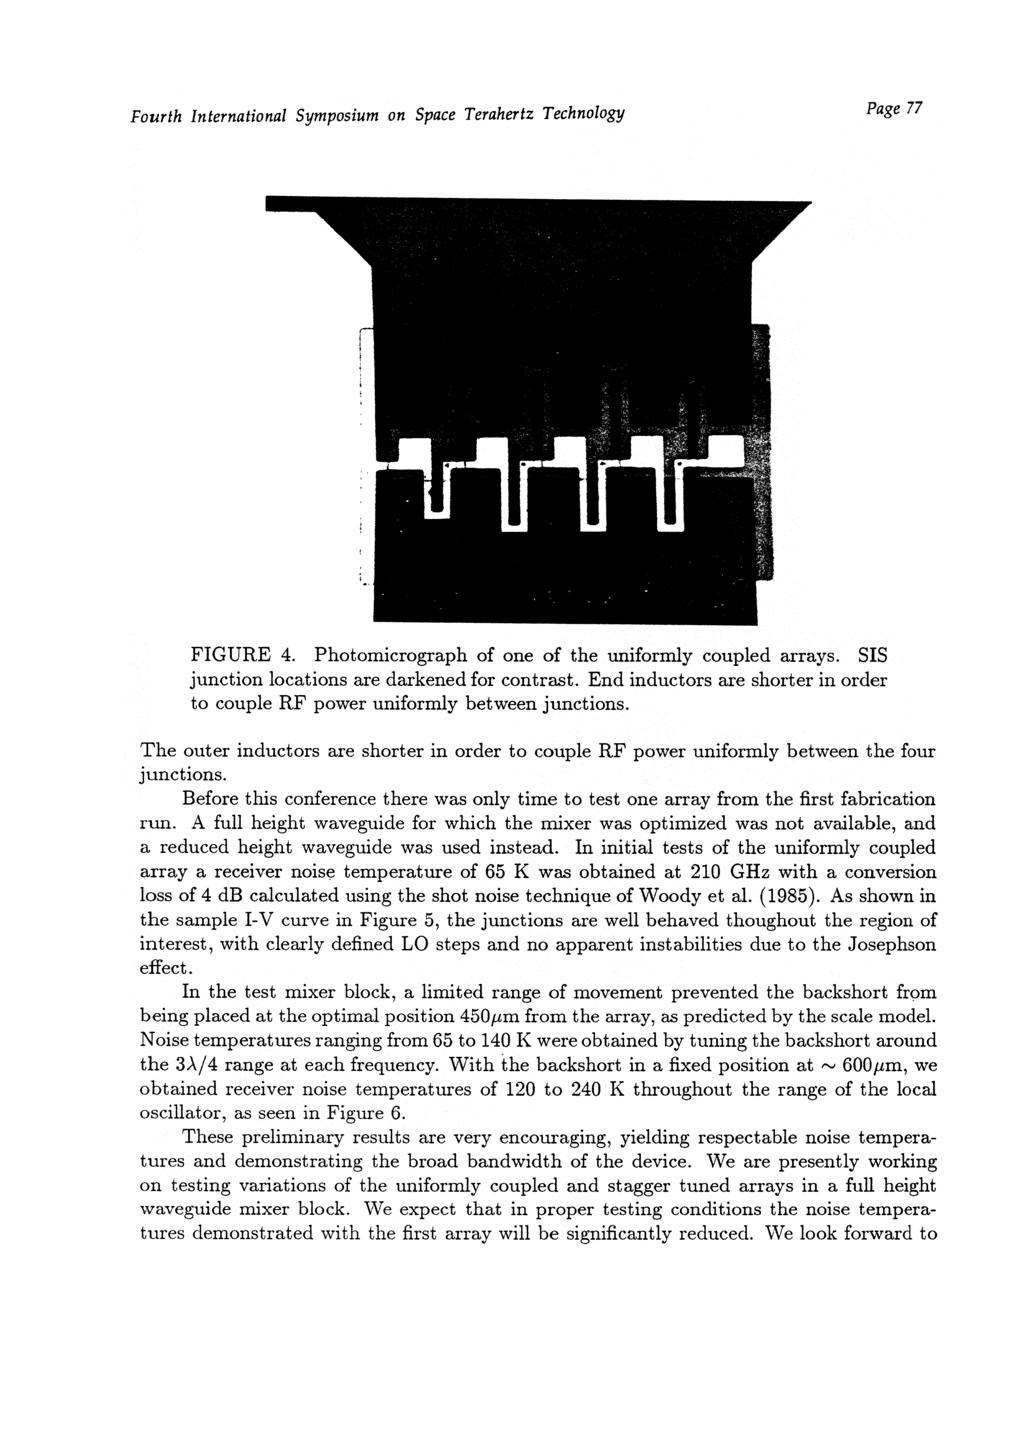 Page 77 FIGURE 4. Photomicrograph of one of the uniformly coupled arrays. SIS junction locations are darkened for contrast.